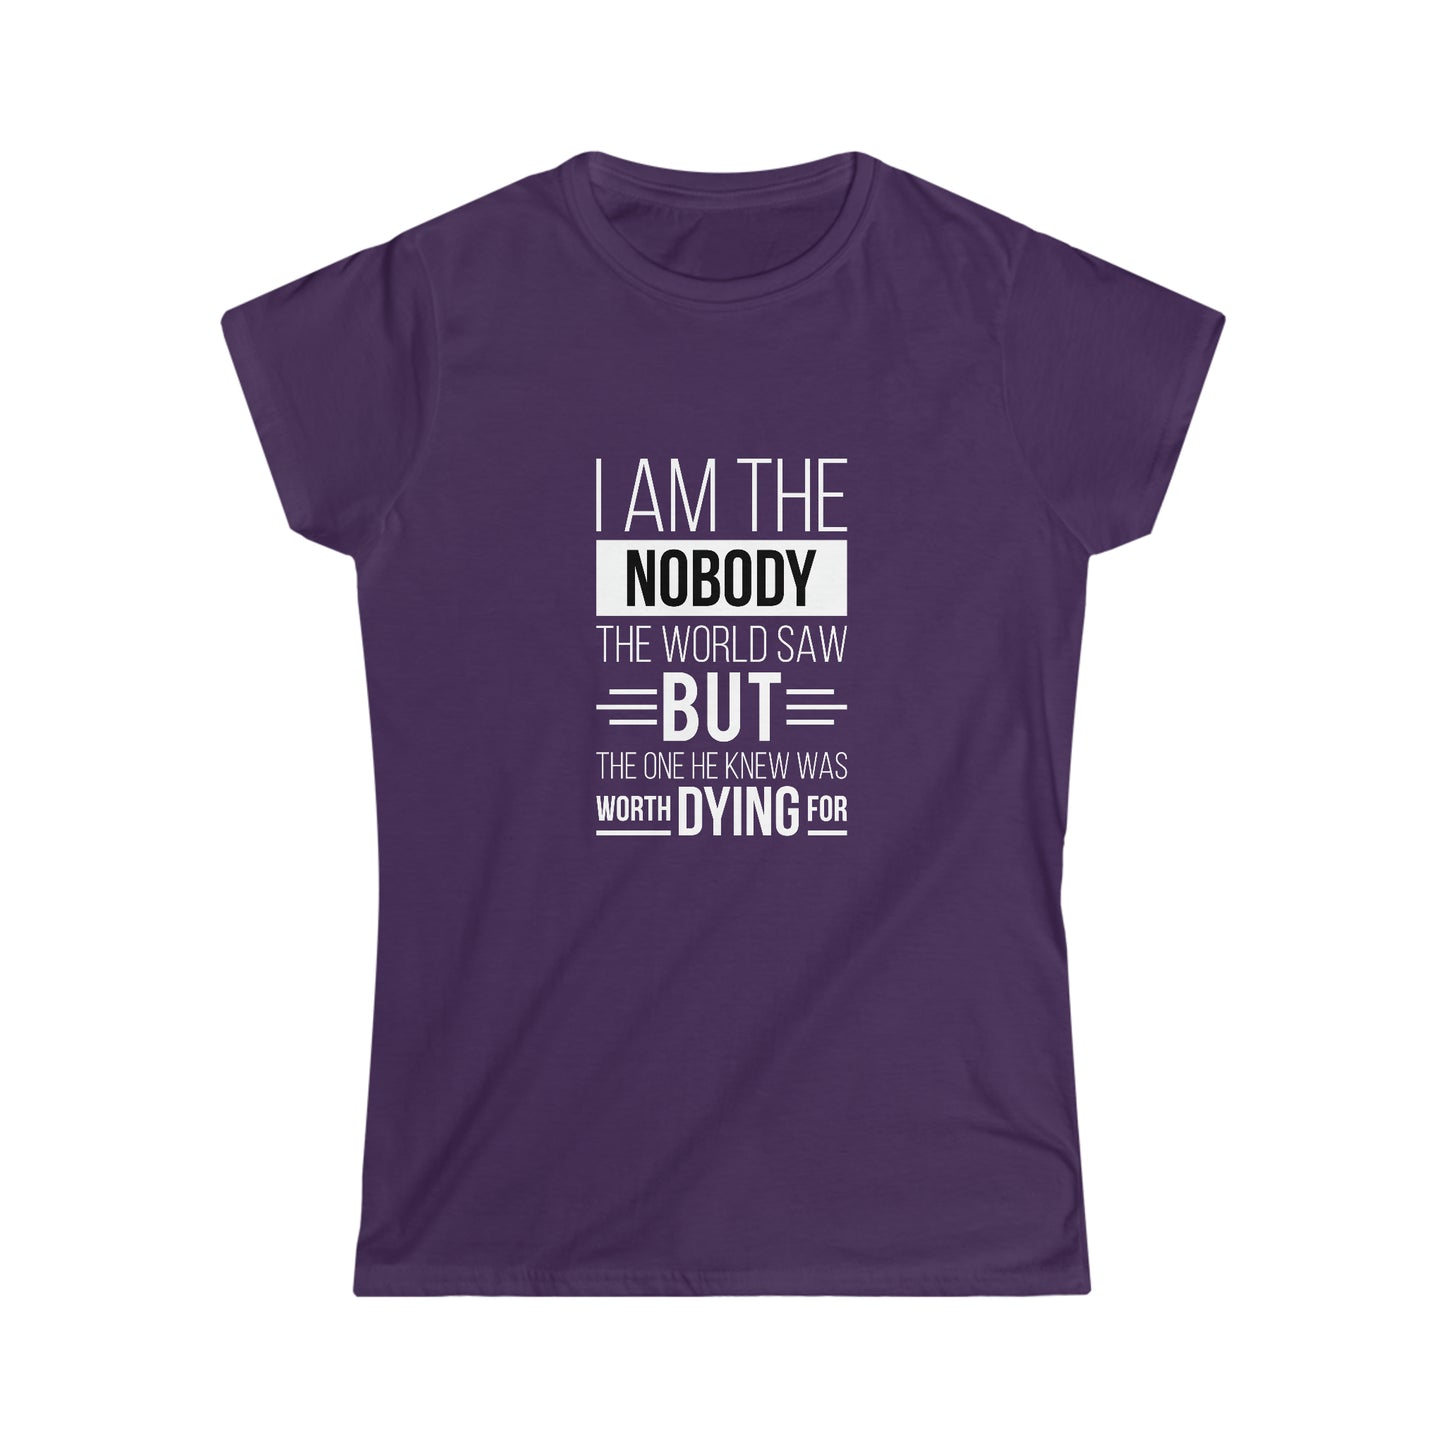 I Am The Nobody The World Saw But The One He knew Was Worth Dying For Women’s T-shirt